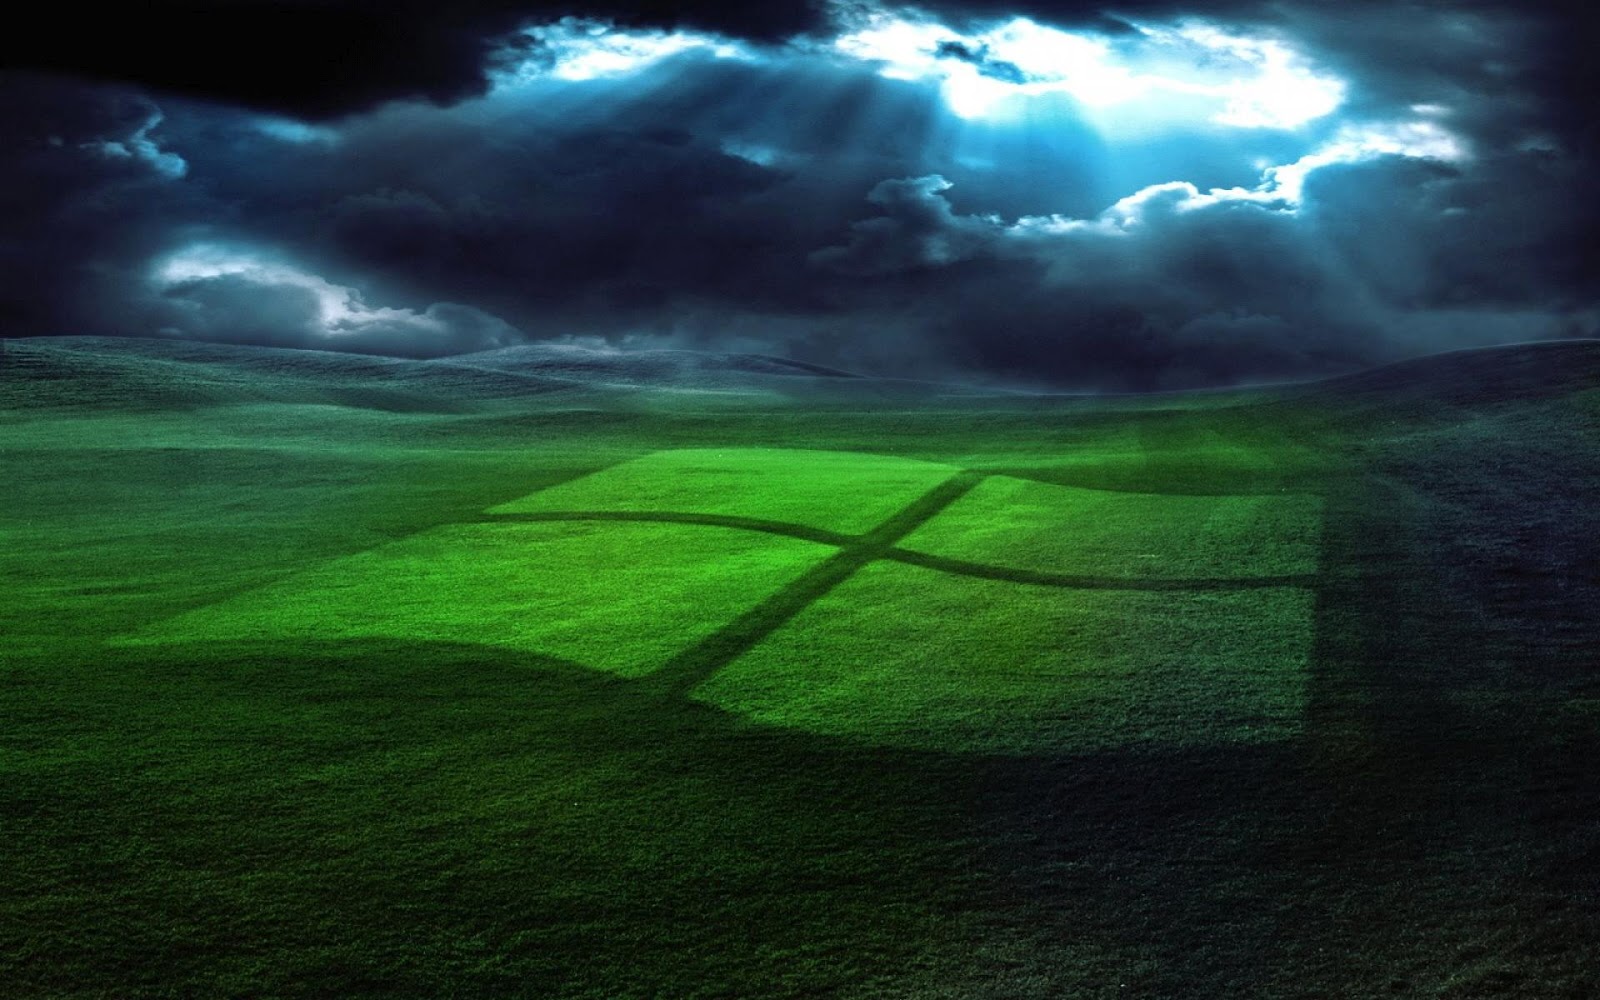 All Wallpapers Windows XP hd Wallpapers 2013